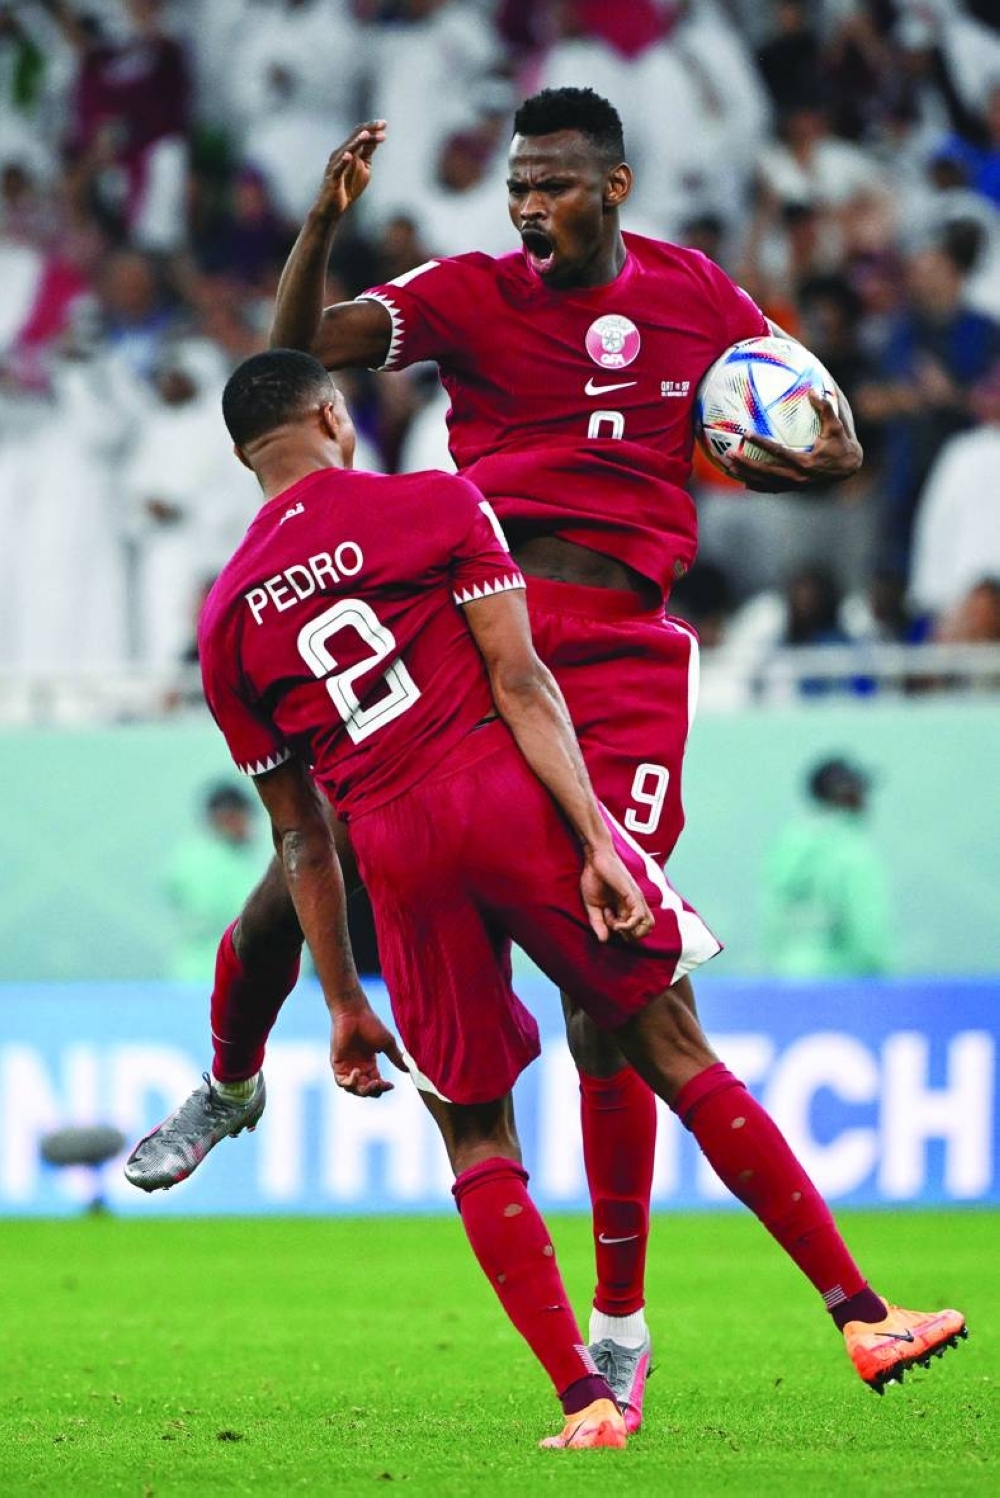 Qatar's forward #09 Mohammed Muntari celebrates scoring his team's first goal with his teammate Qatar's defender #02 Pedro Miguel during the Qatar 2022 World Cup Group A football match between Qatar and Senegal at the Al-Thumama Stadium in Doha on November 25, 2022. (Photo by OZAN KOSE / AFP)